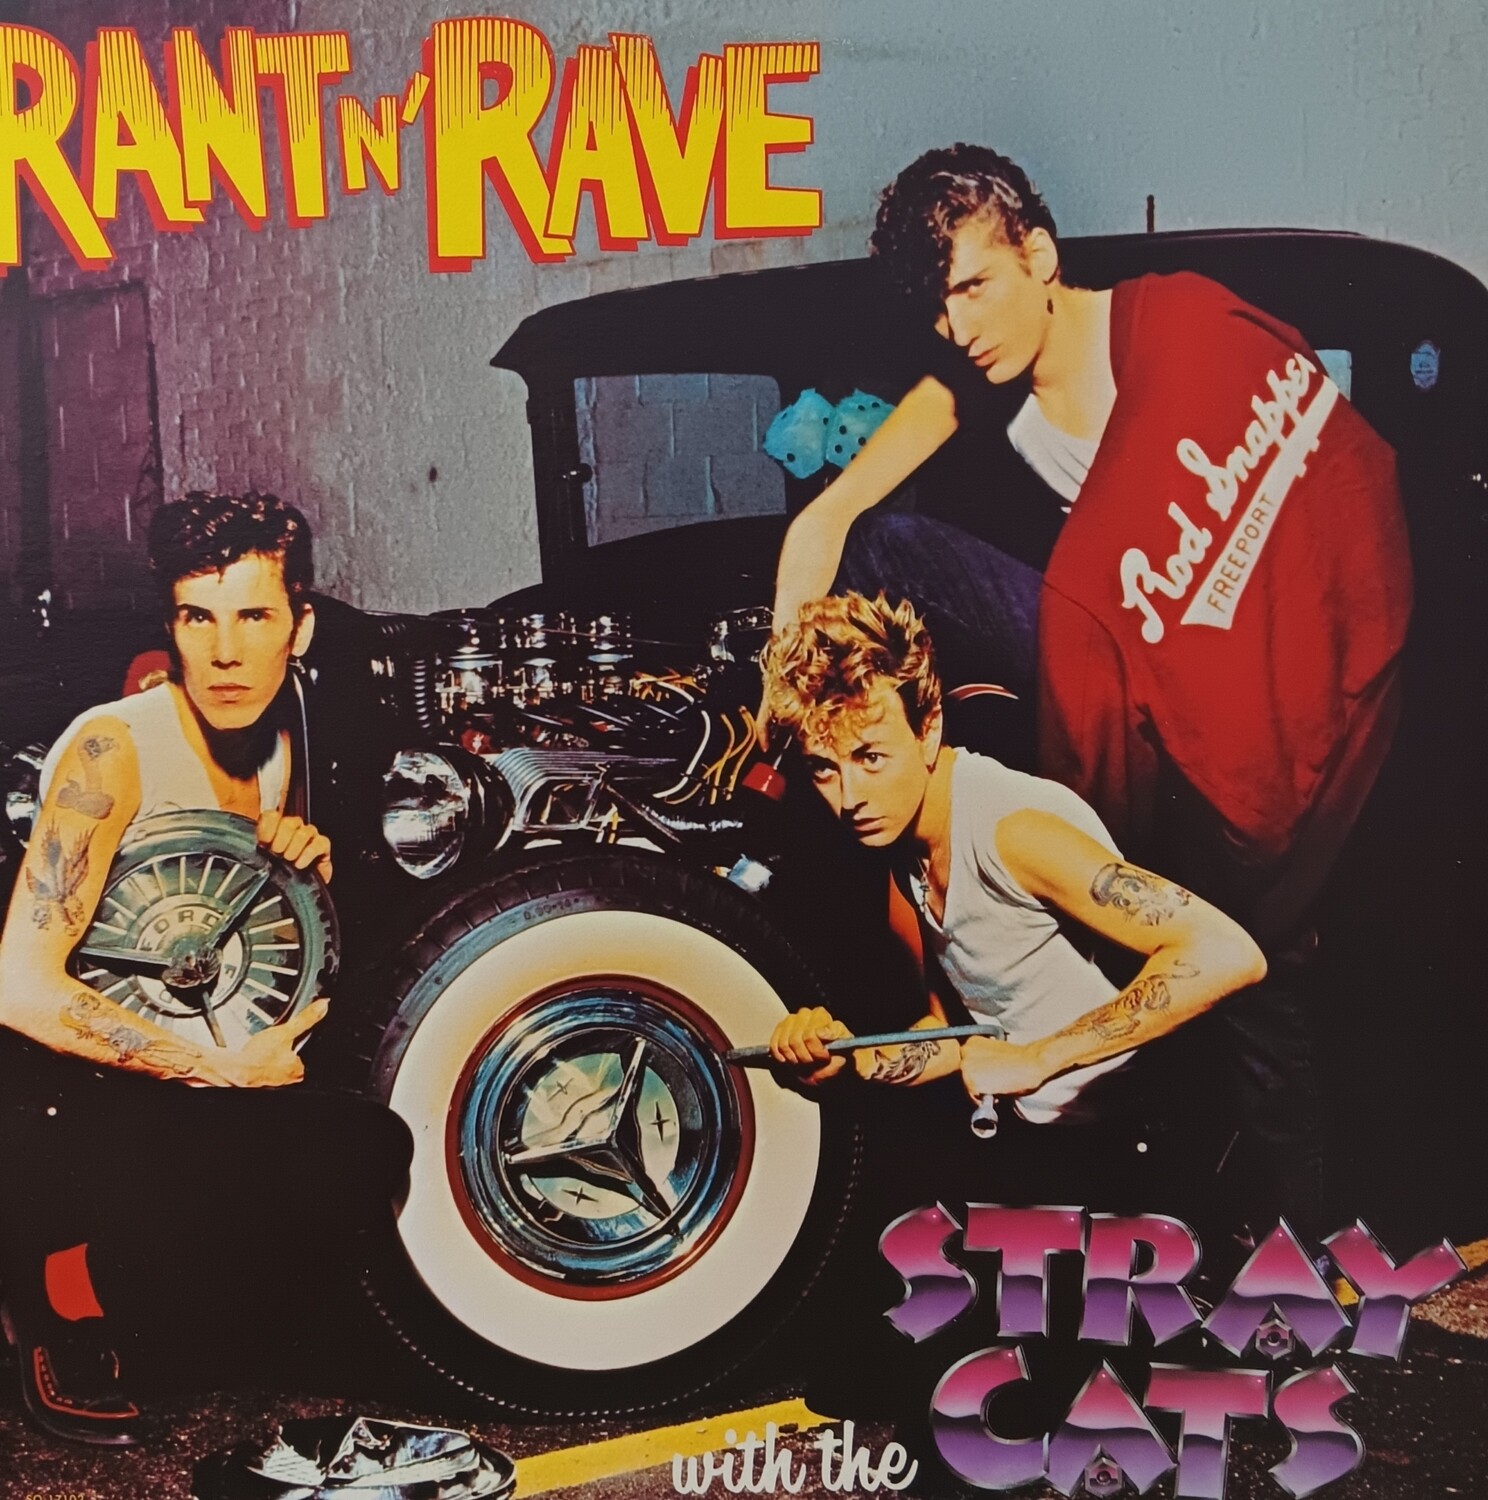 THE STRAY CATS - Rant n rave